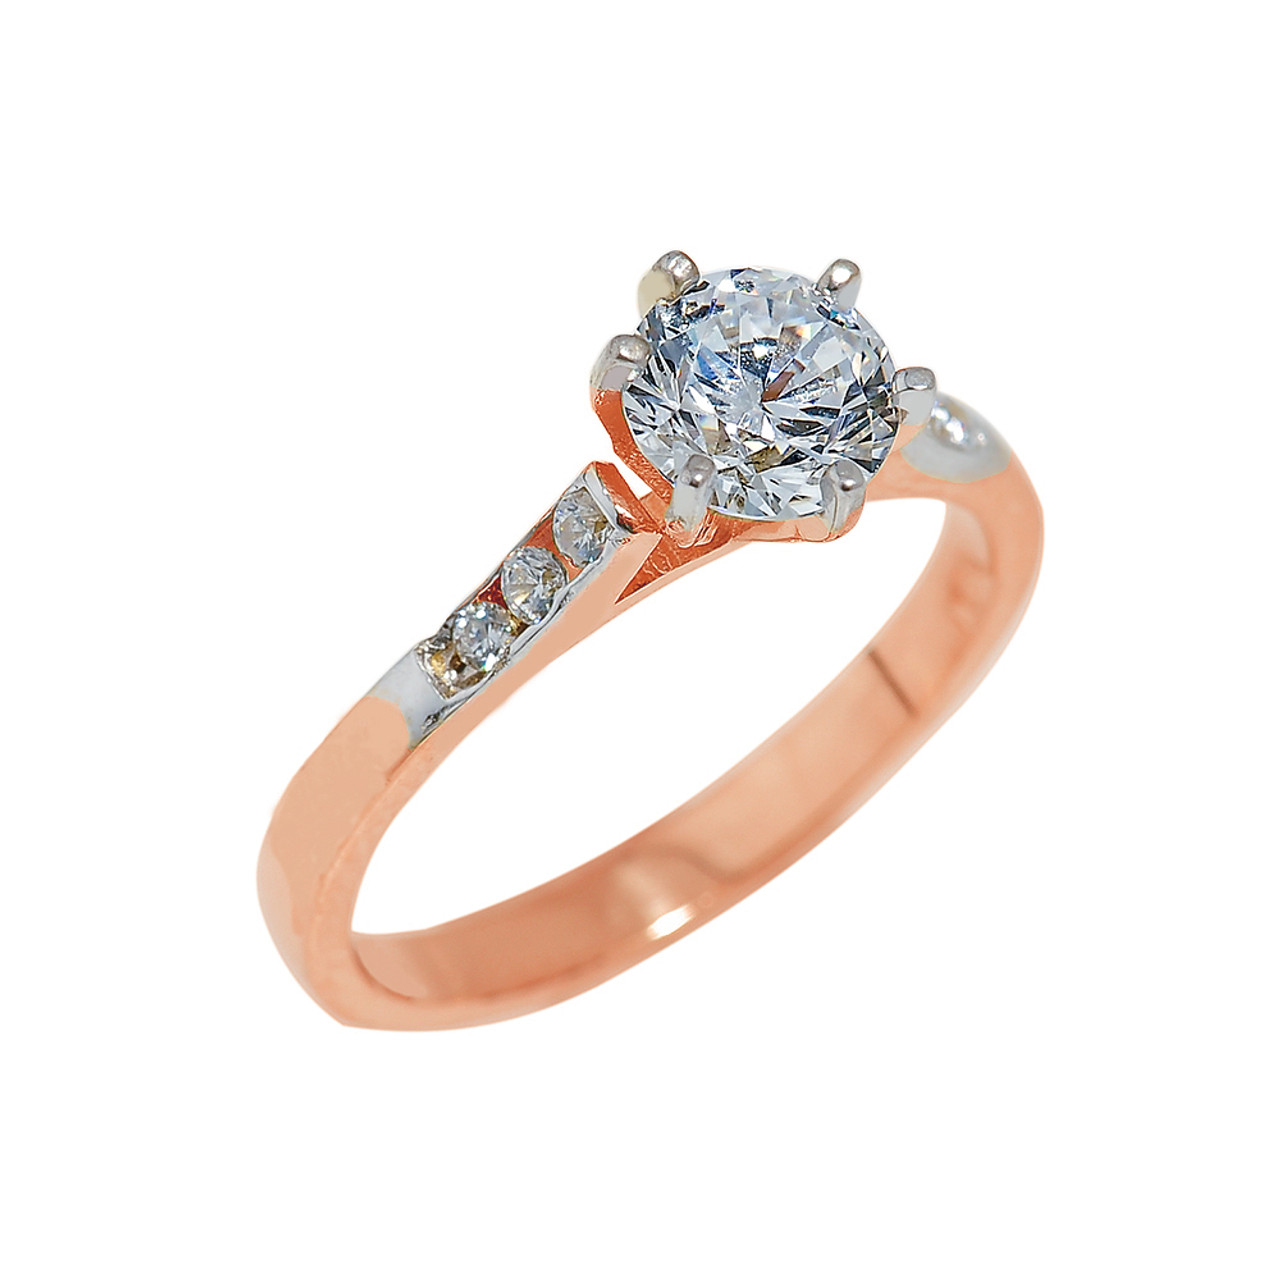  Rose  Gold  Engagement  Ring  with Cubic Zirconia  Engagement  